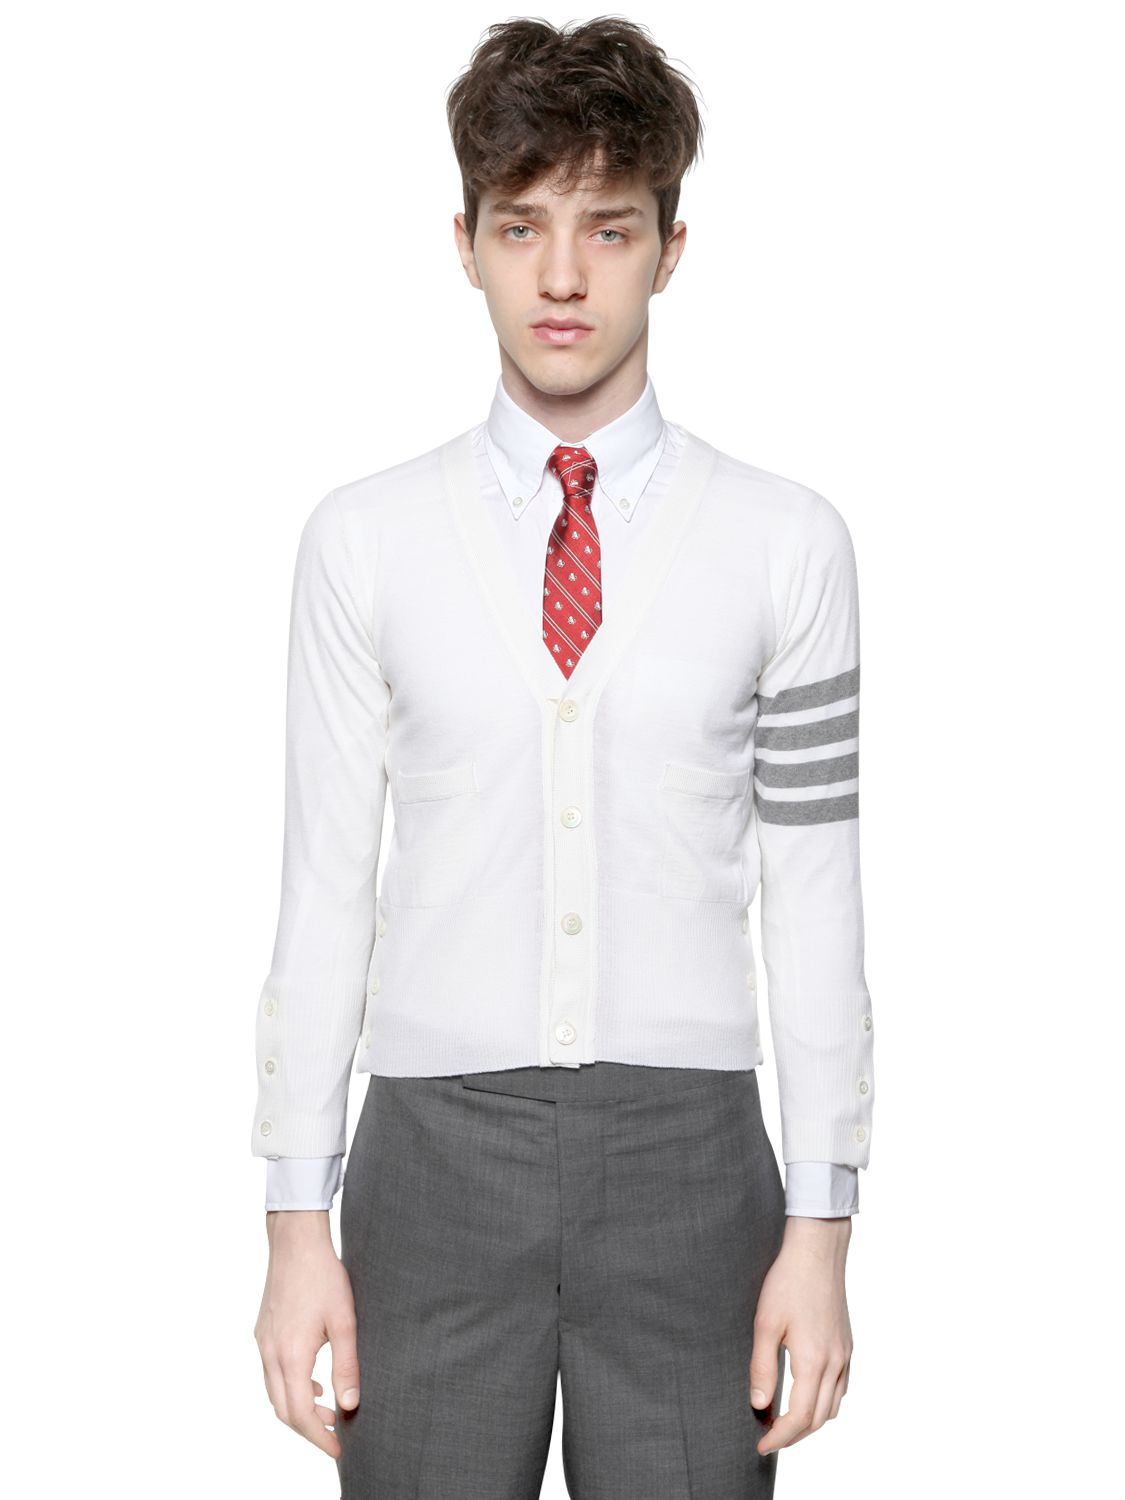 Lyst - Thom Browne Wool Knit Striped Sleeve Cardigan in White for Men